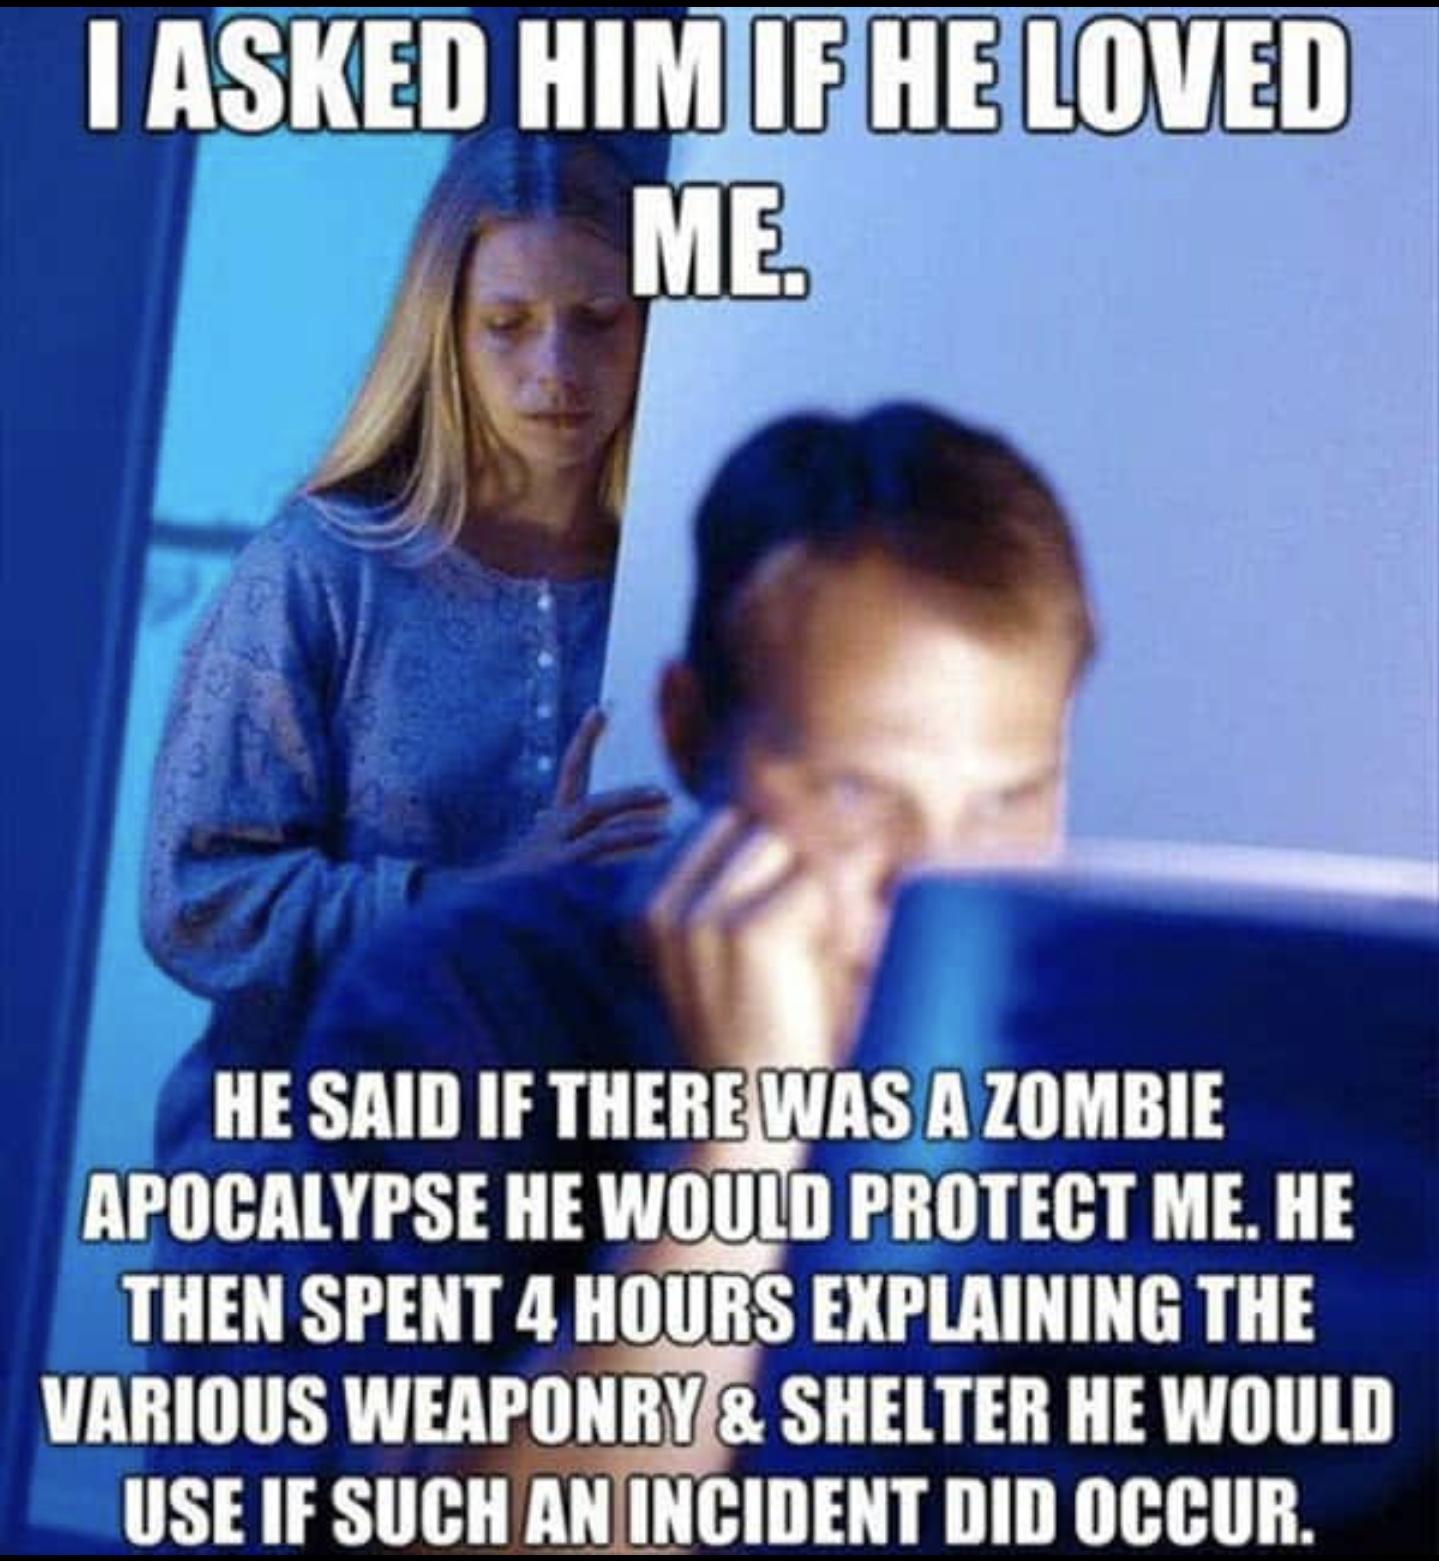 funny memes - dank memes - memes for husband - I Asked Him If He Loved Me. He Said If There Was A Zombie Apocalypse He Would Protect Me. He Then Spent 4 Hours Explaining The Various Weaponry & Shelter He Would Use If Such An Incident Did Occur.